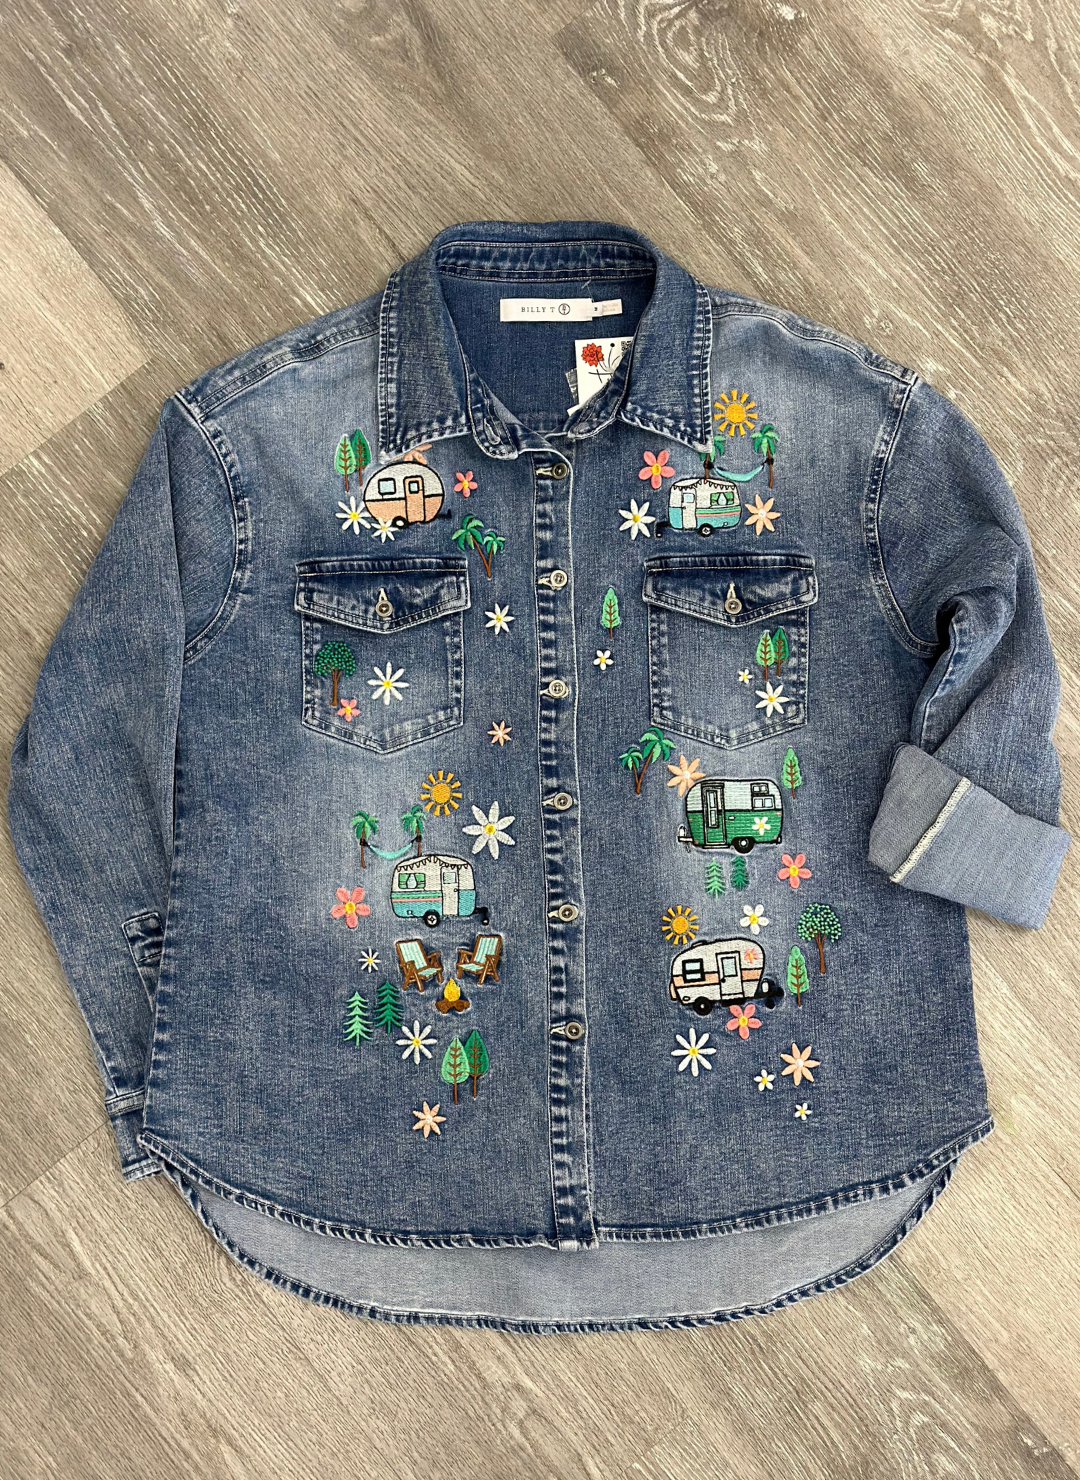 Flat image of denim camper shirt with embroidered flowers, trees, and trailers.